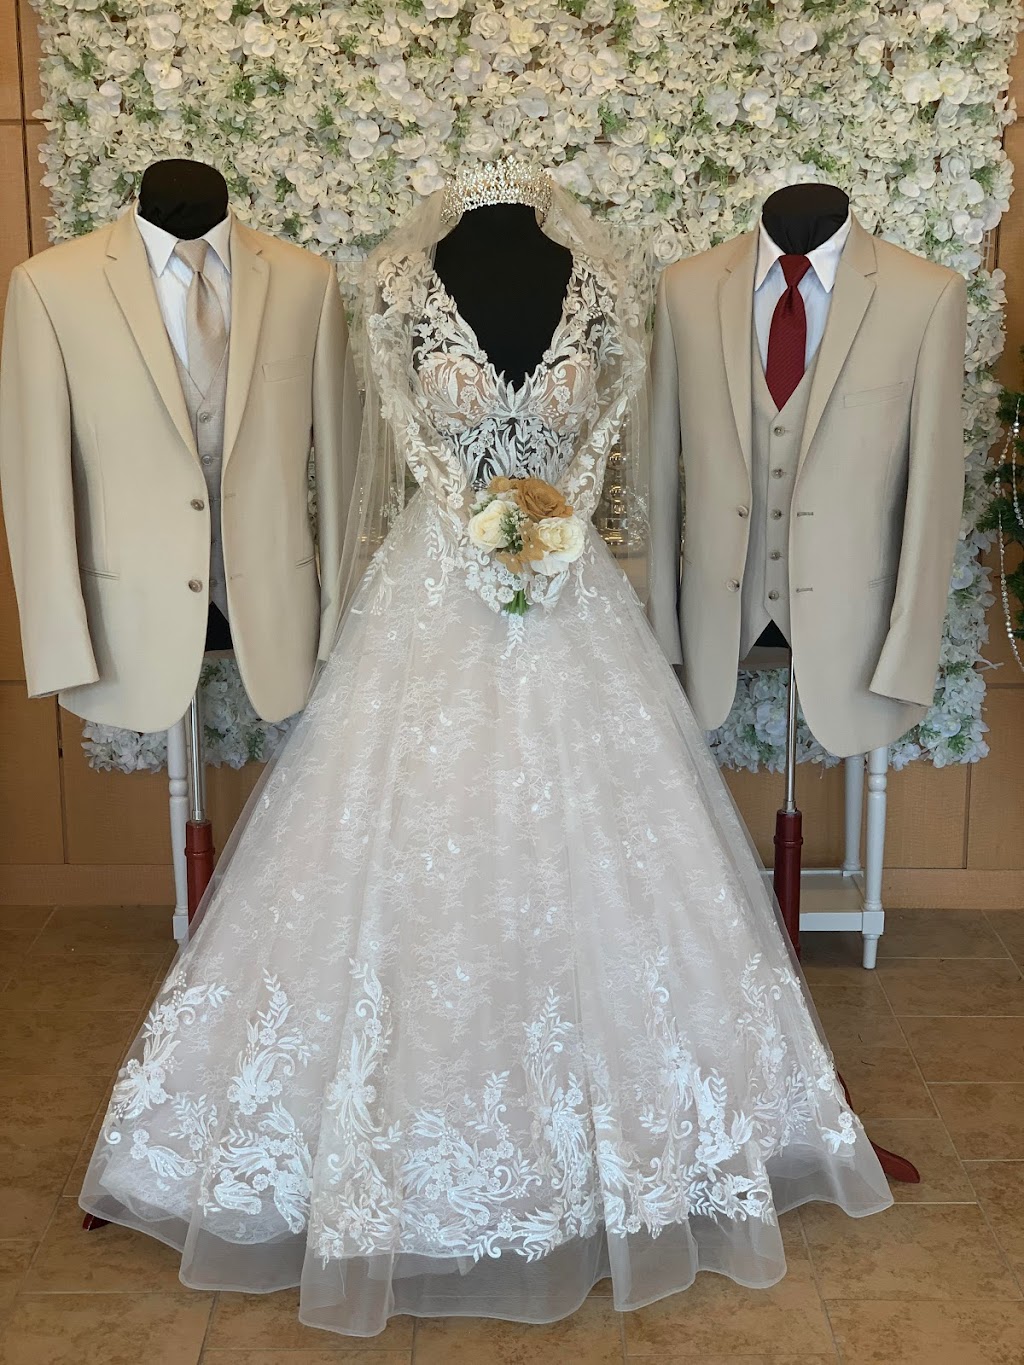 Paradise Bridals & Tuxedos | 10 Farber Dr Suite 4, Bellport, NY 11713 | Phone: (631) 654-5020